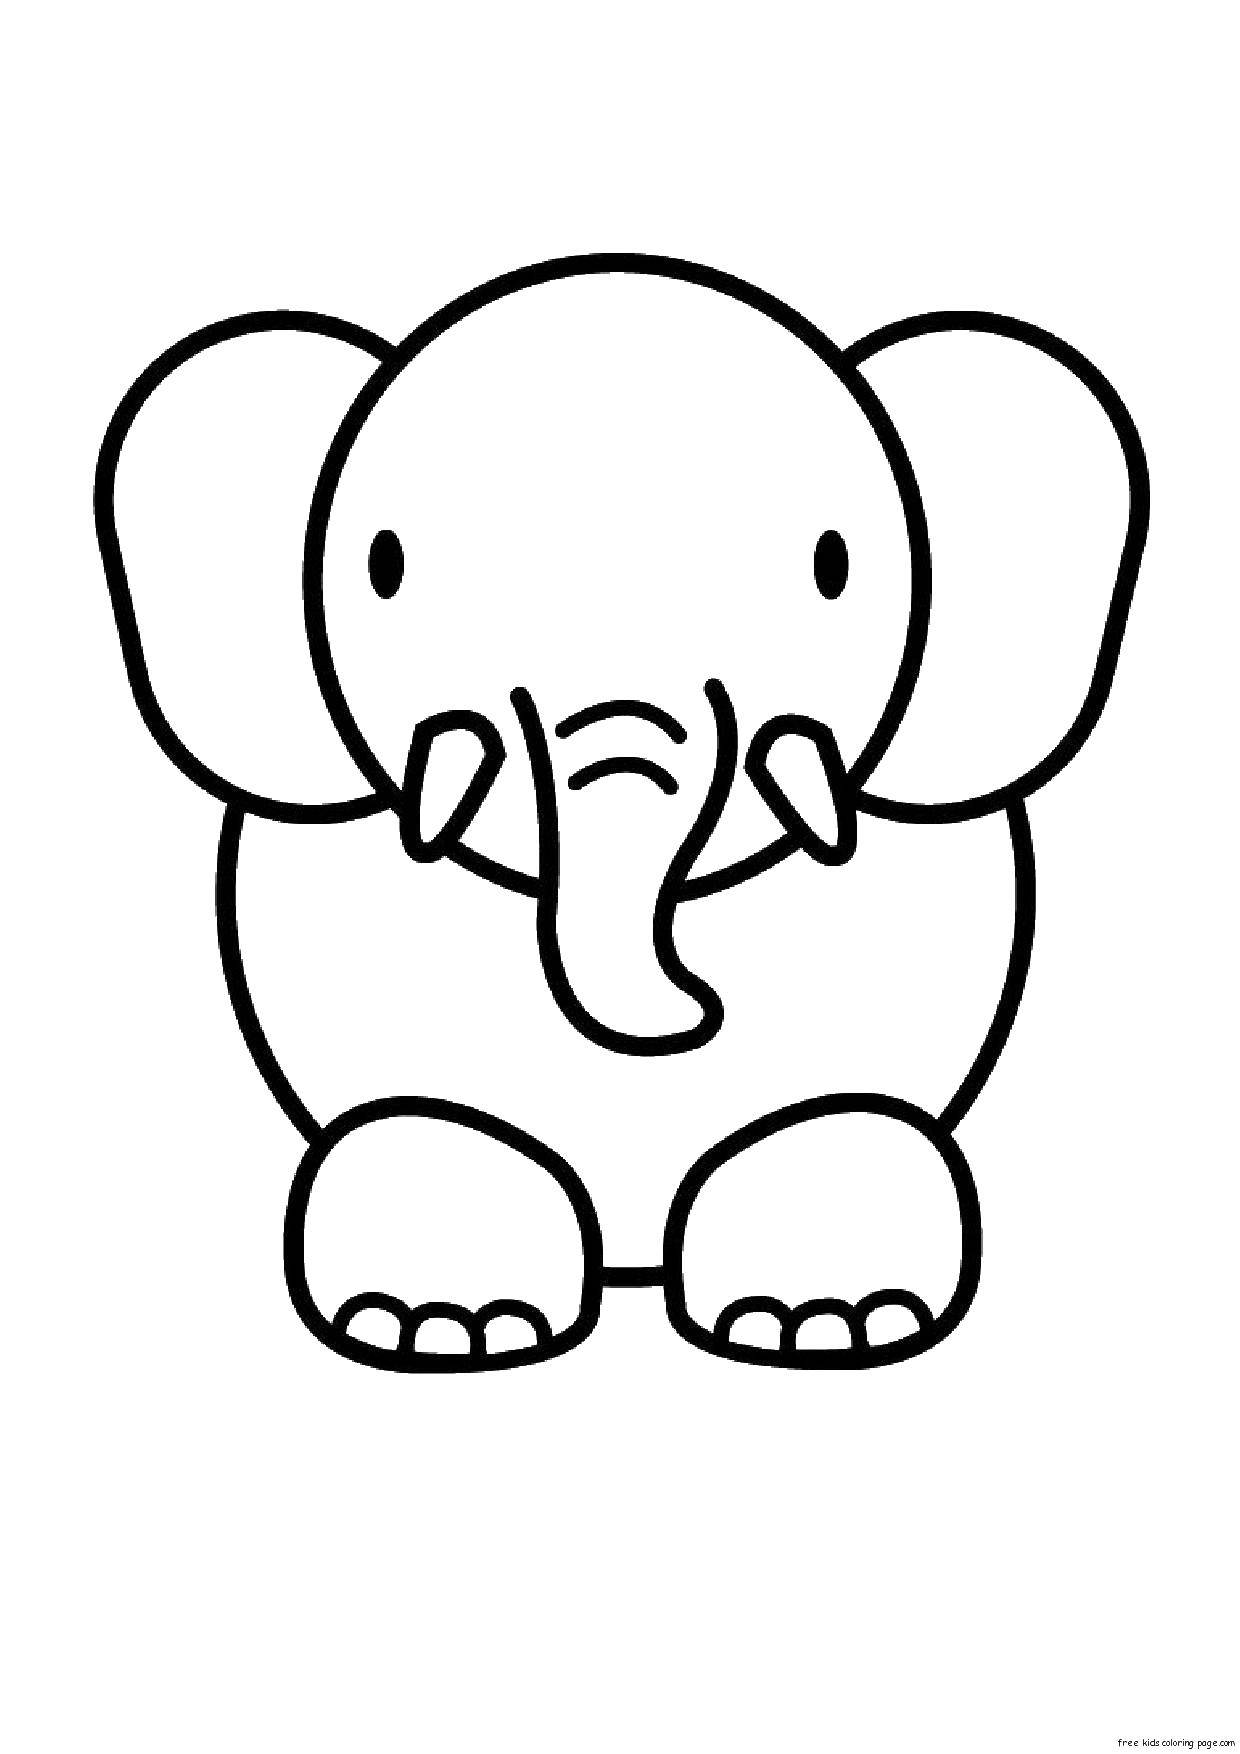 Coloring Elephant with tusks. Category animals. Tags:  elephant, tusks, trunk.